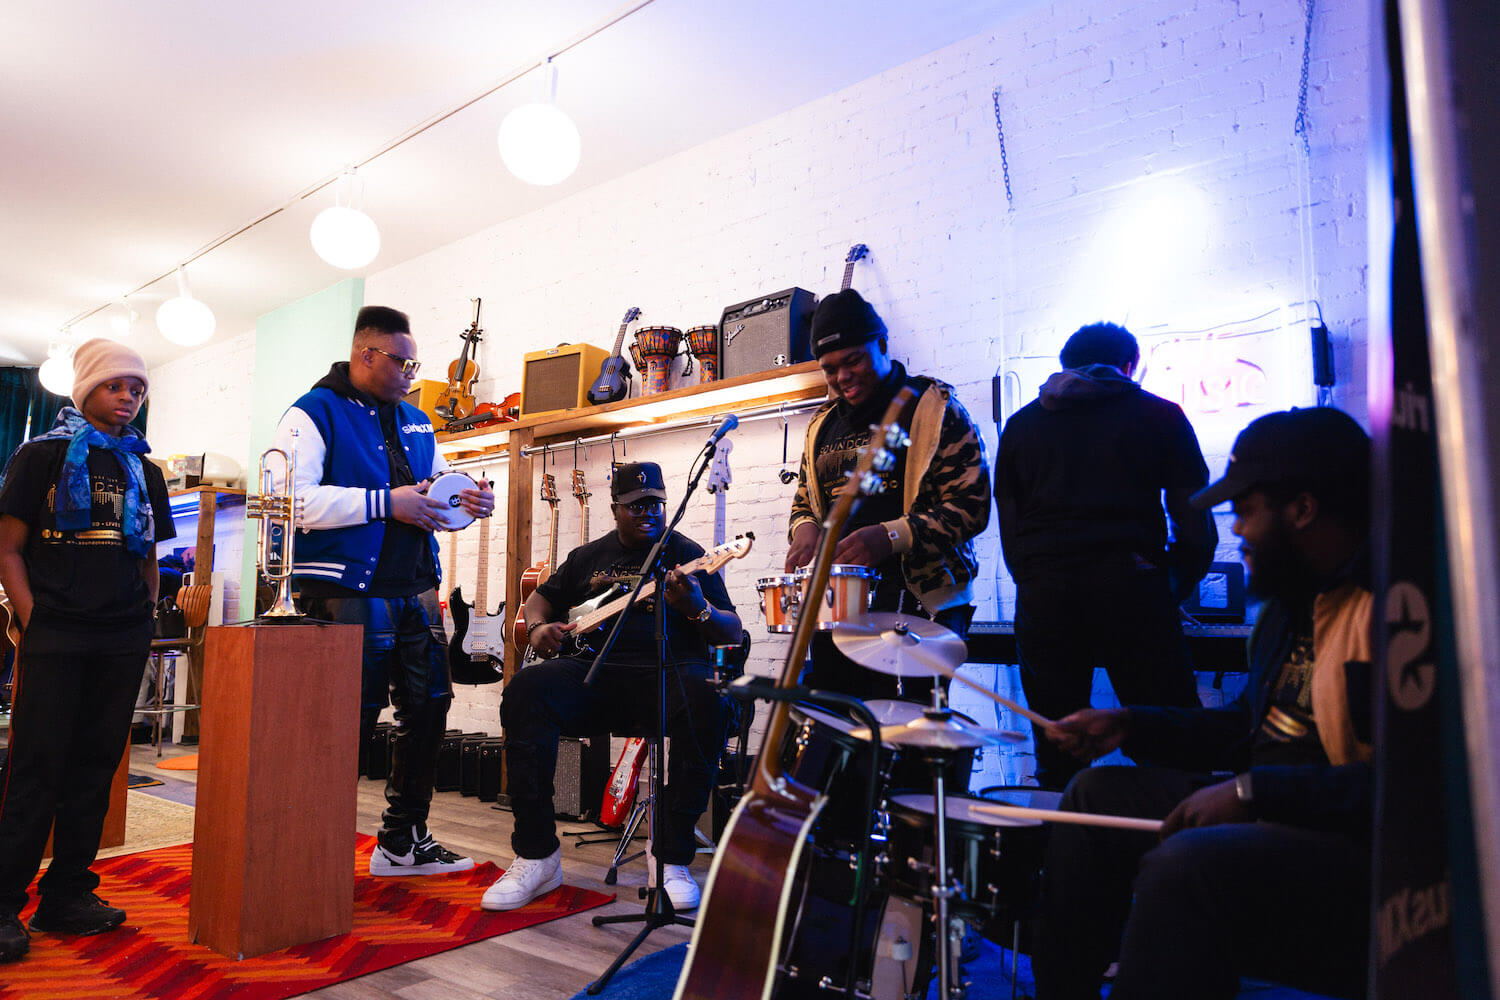 A group of people play musical instruments at the Soundwaves Music Store in Toronto.